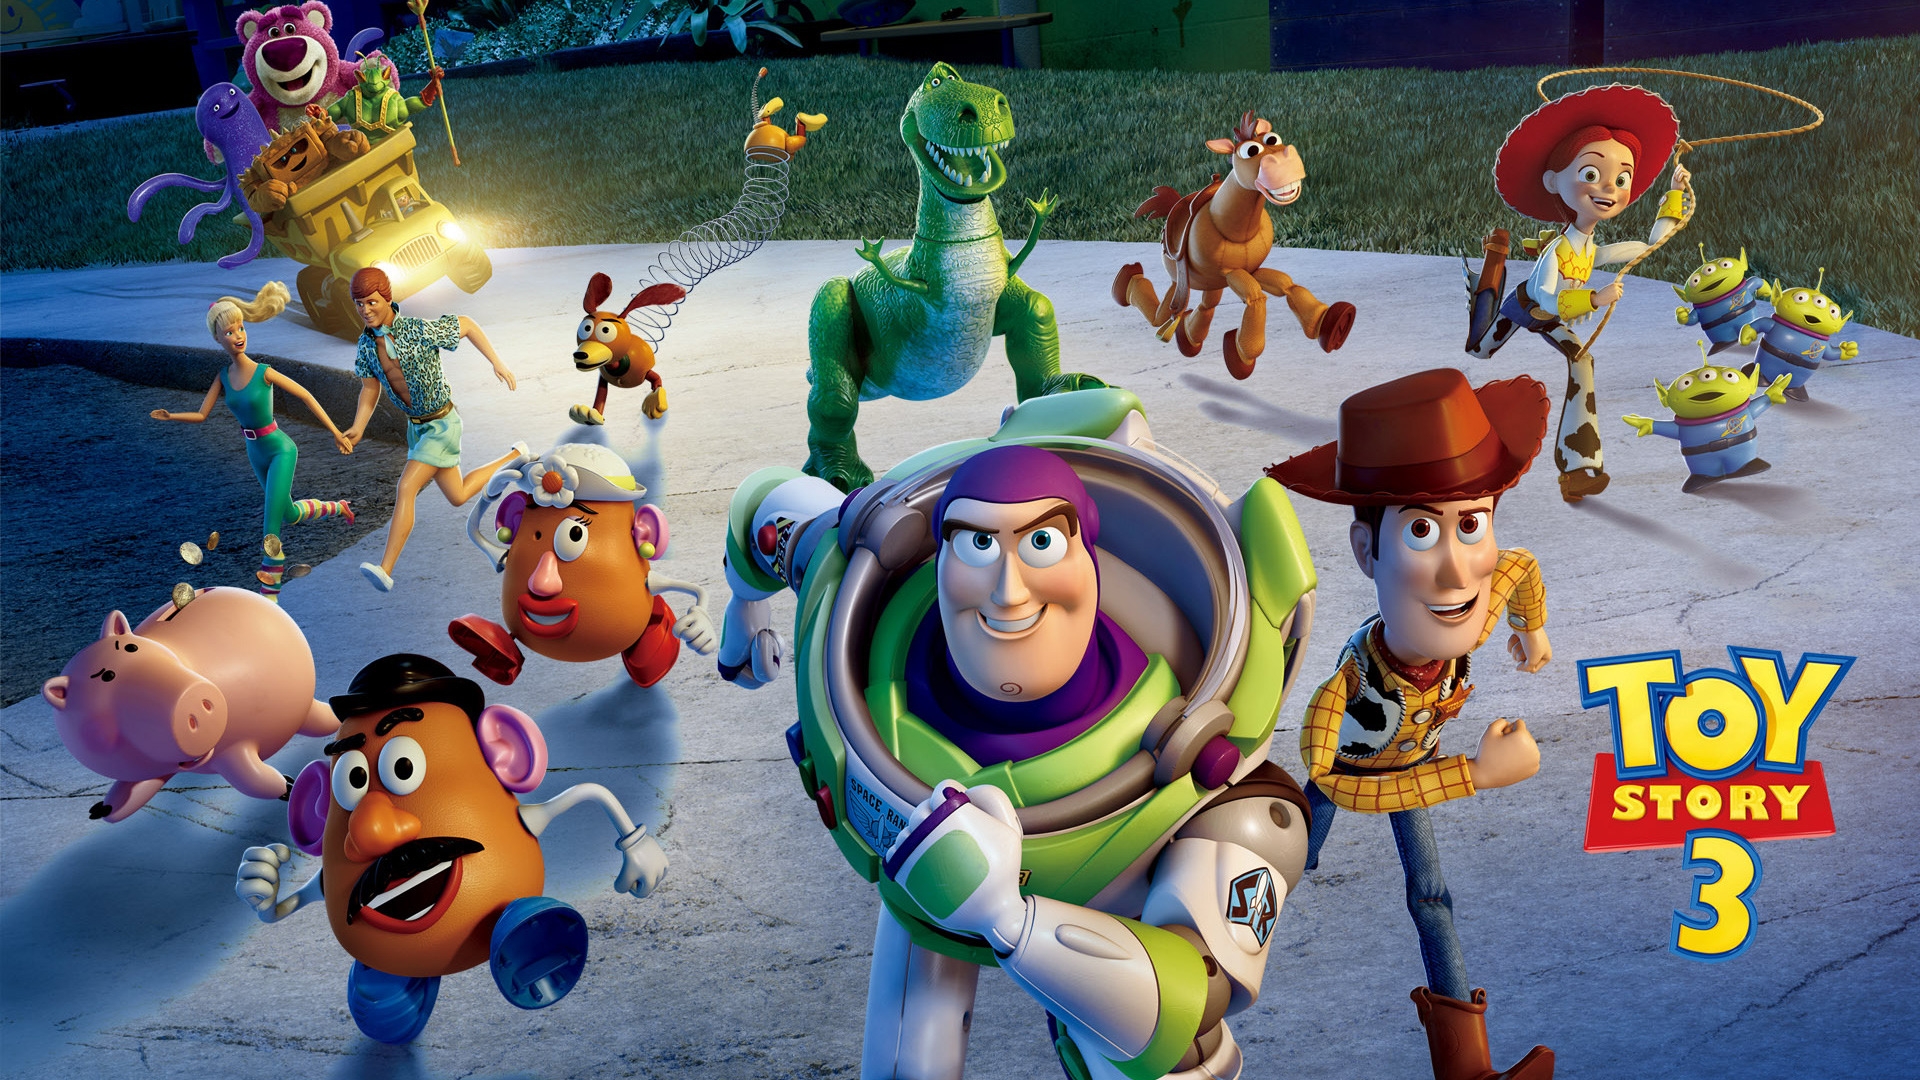 Toy Story 3 for 1920 x 1080 HDTV 1080p resolution